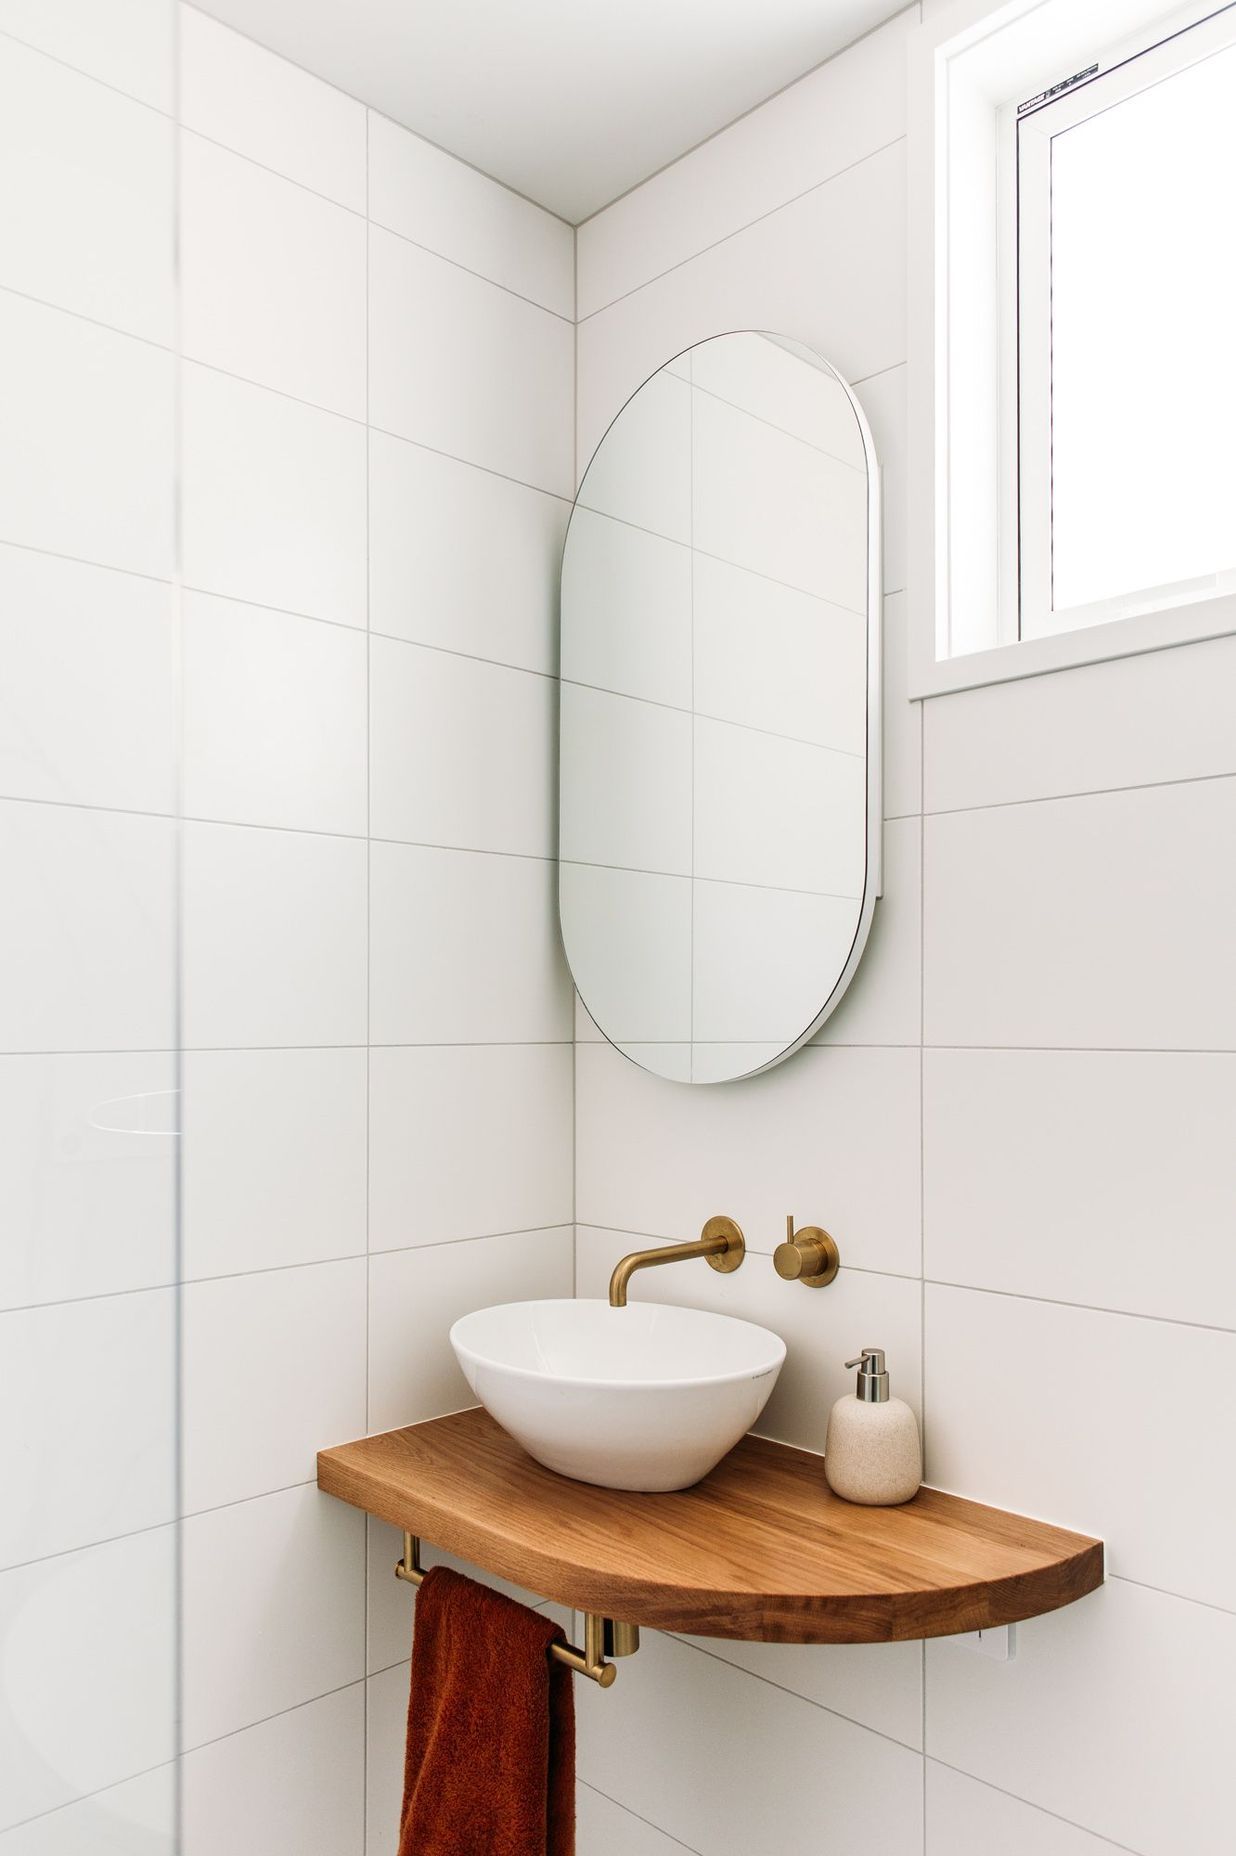 Gorgeously simple basin and vanity.